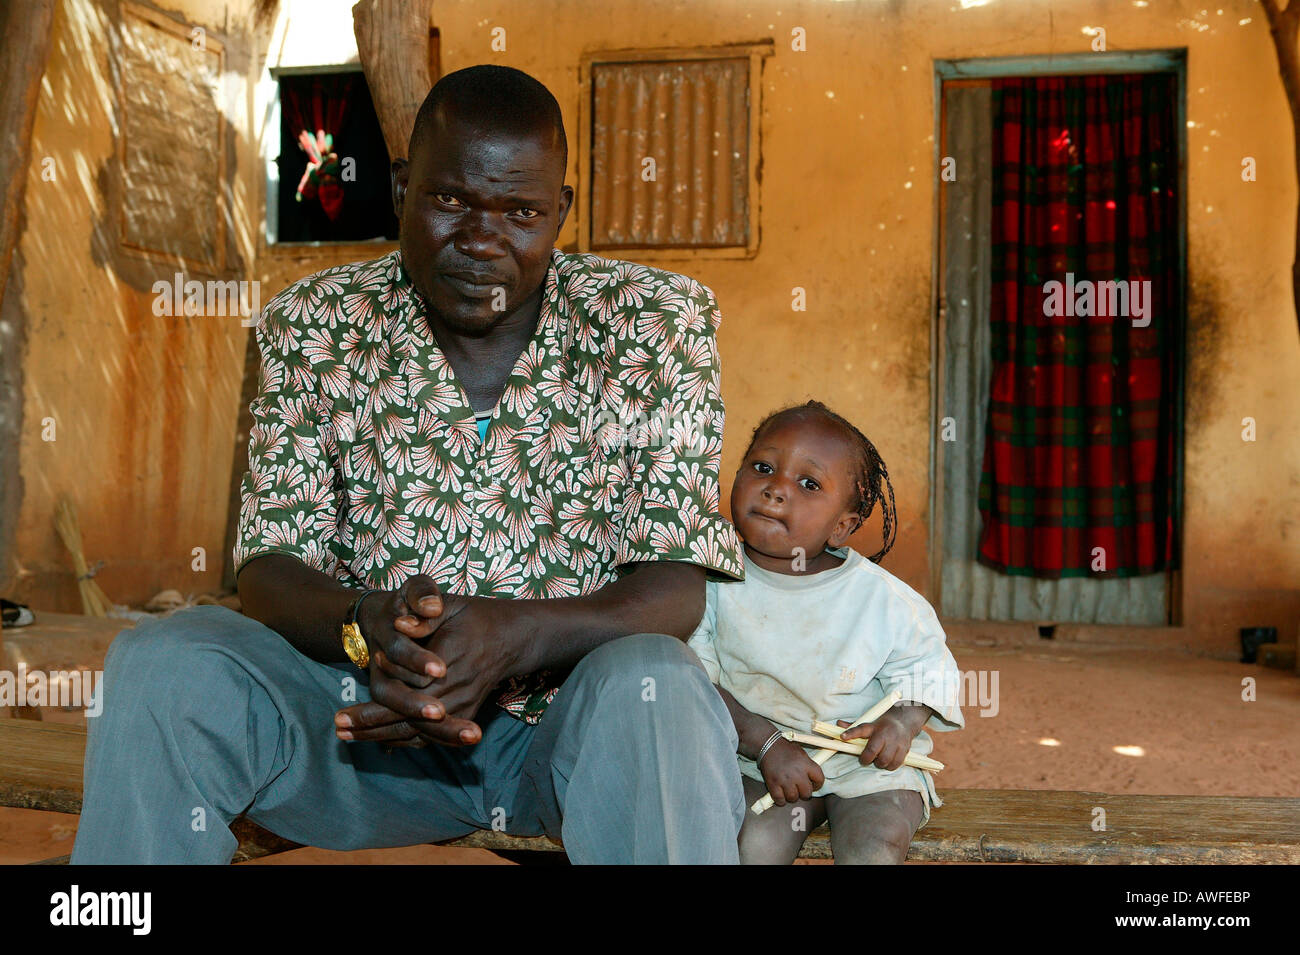 Father and half-orphaned child, HIV/AIDS infected, Cameroon, Africa Stock Photo